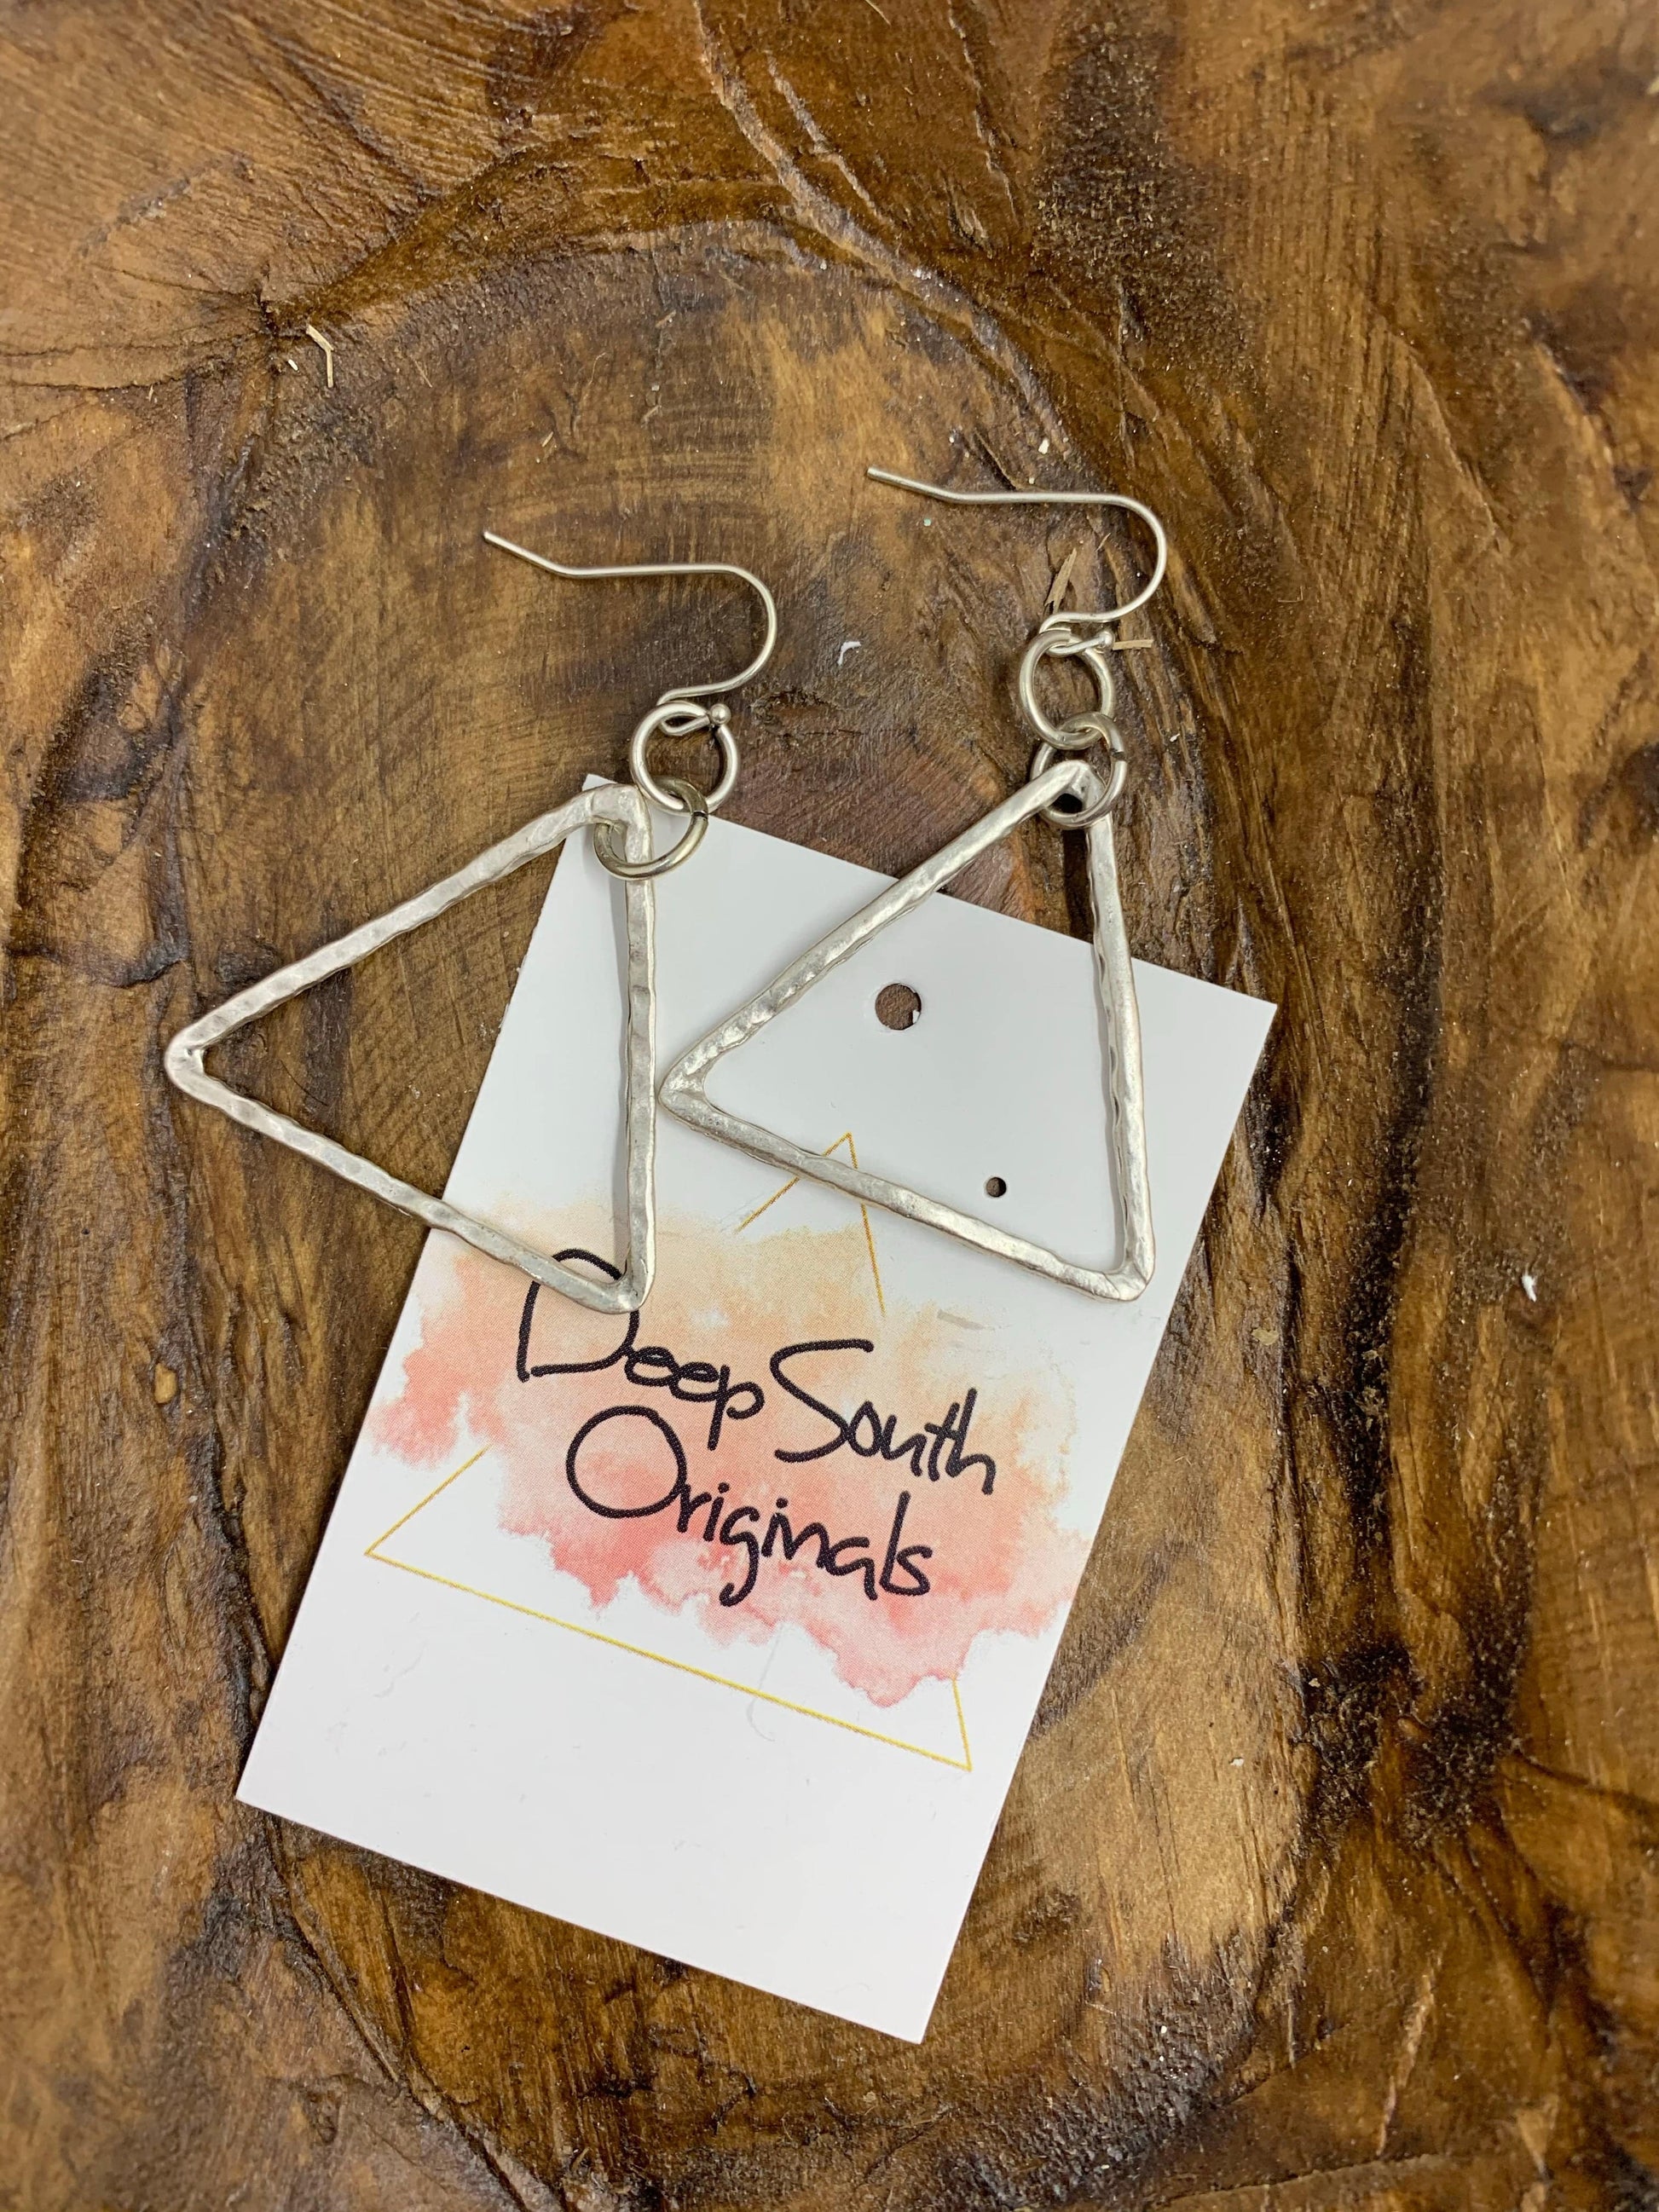 Silver Hammered Triangle earrings - Deep South Originals